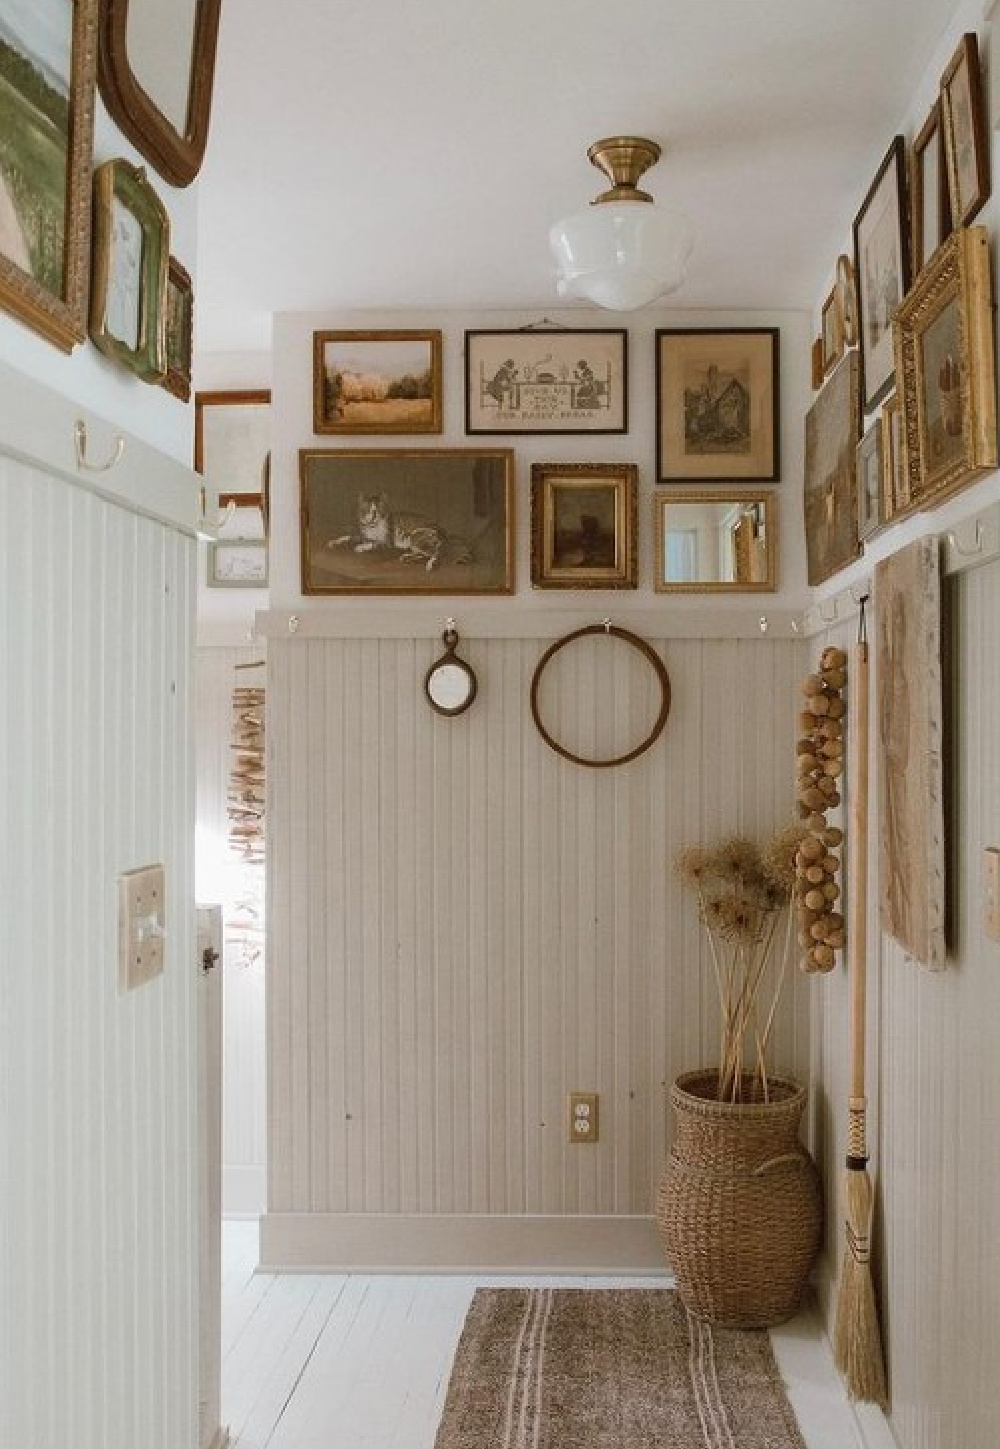 Gallery wall above beadboard with a mix of original art and prints in neutral tones - @forthehome. #gallerywall